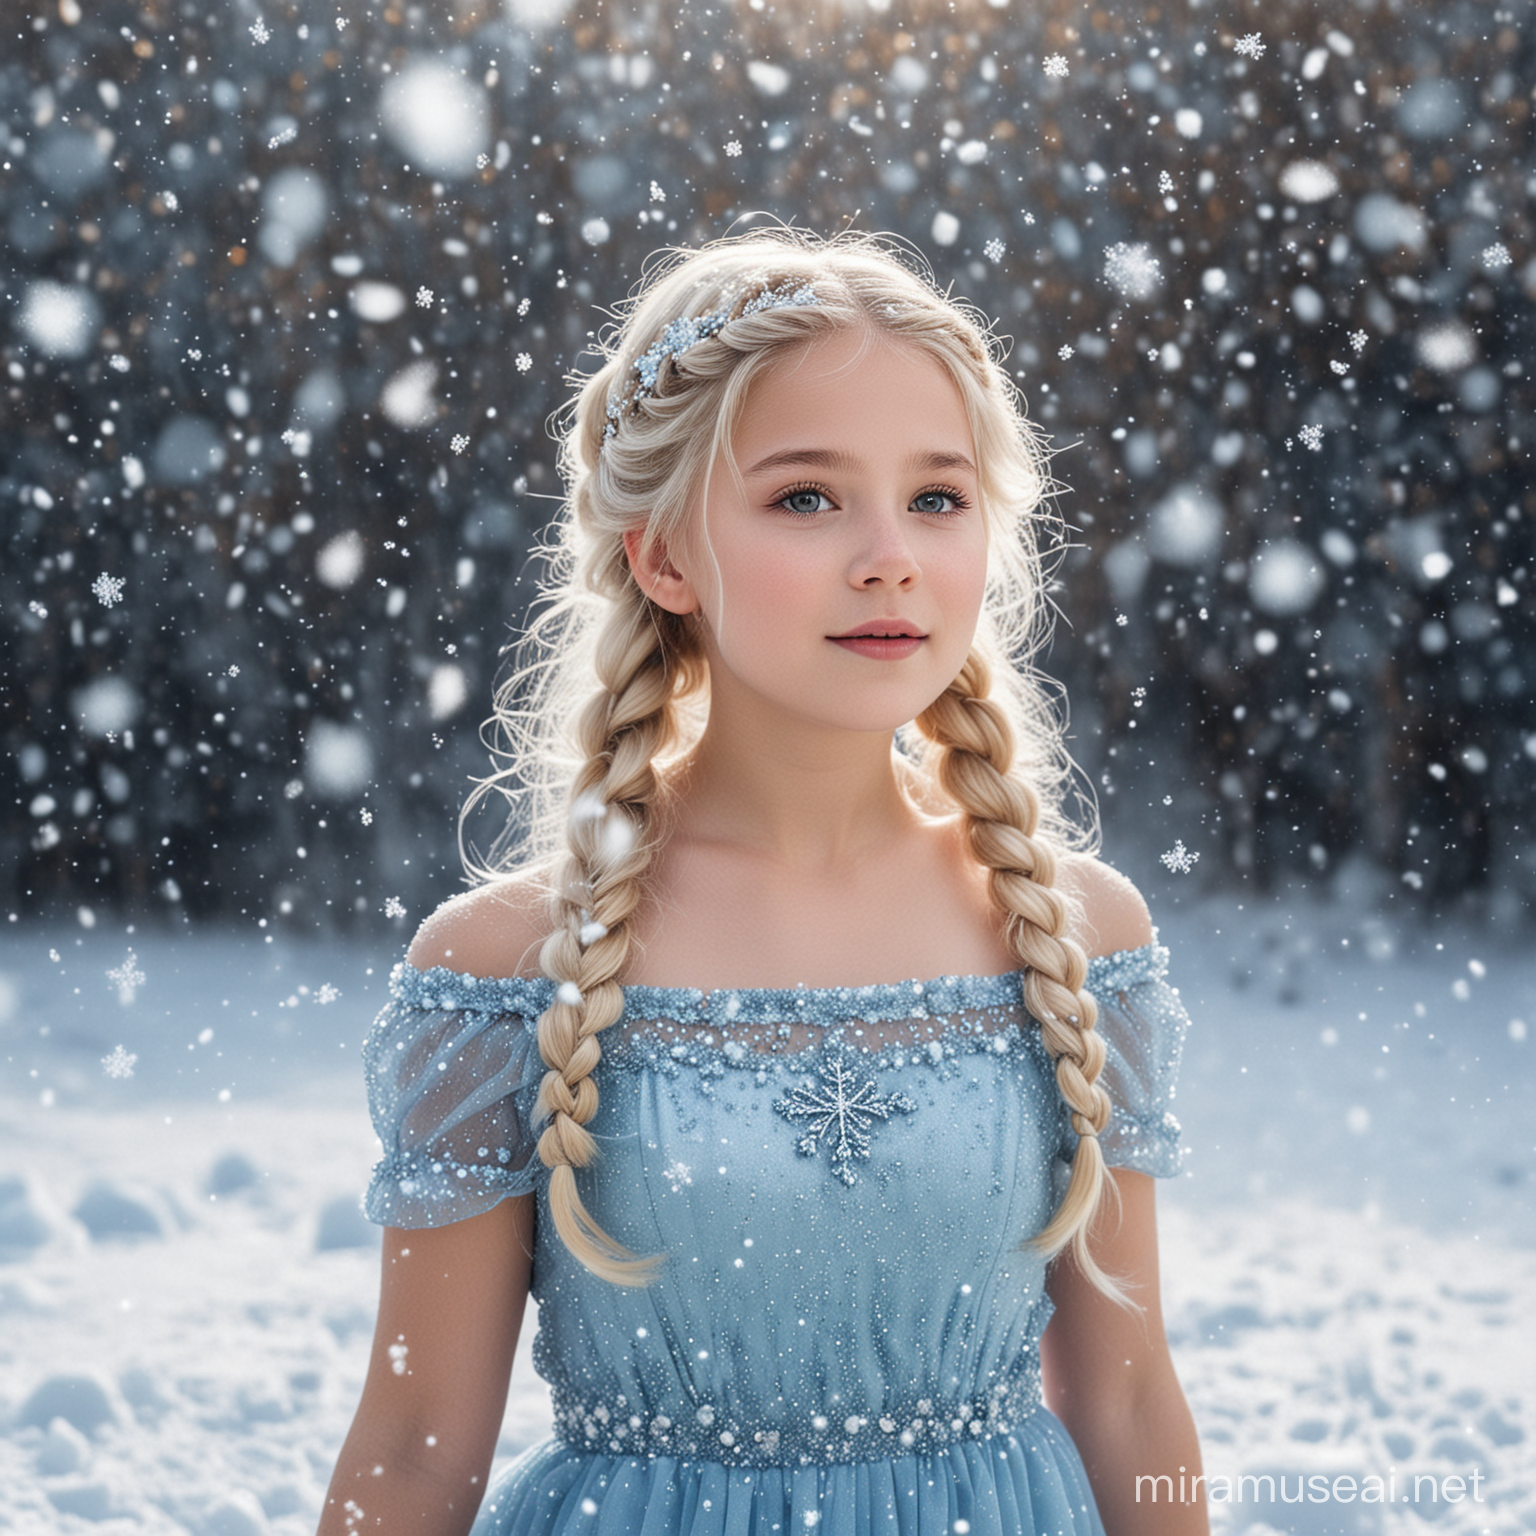 little white girl being an ice queen with magic powers living in the snow environment playing with snowflakes wearing a light blue glittery dress with blond braided hair to the side with ice flowers in the hair